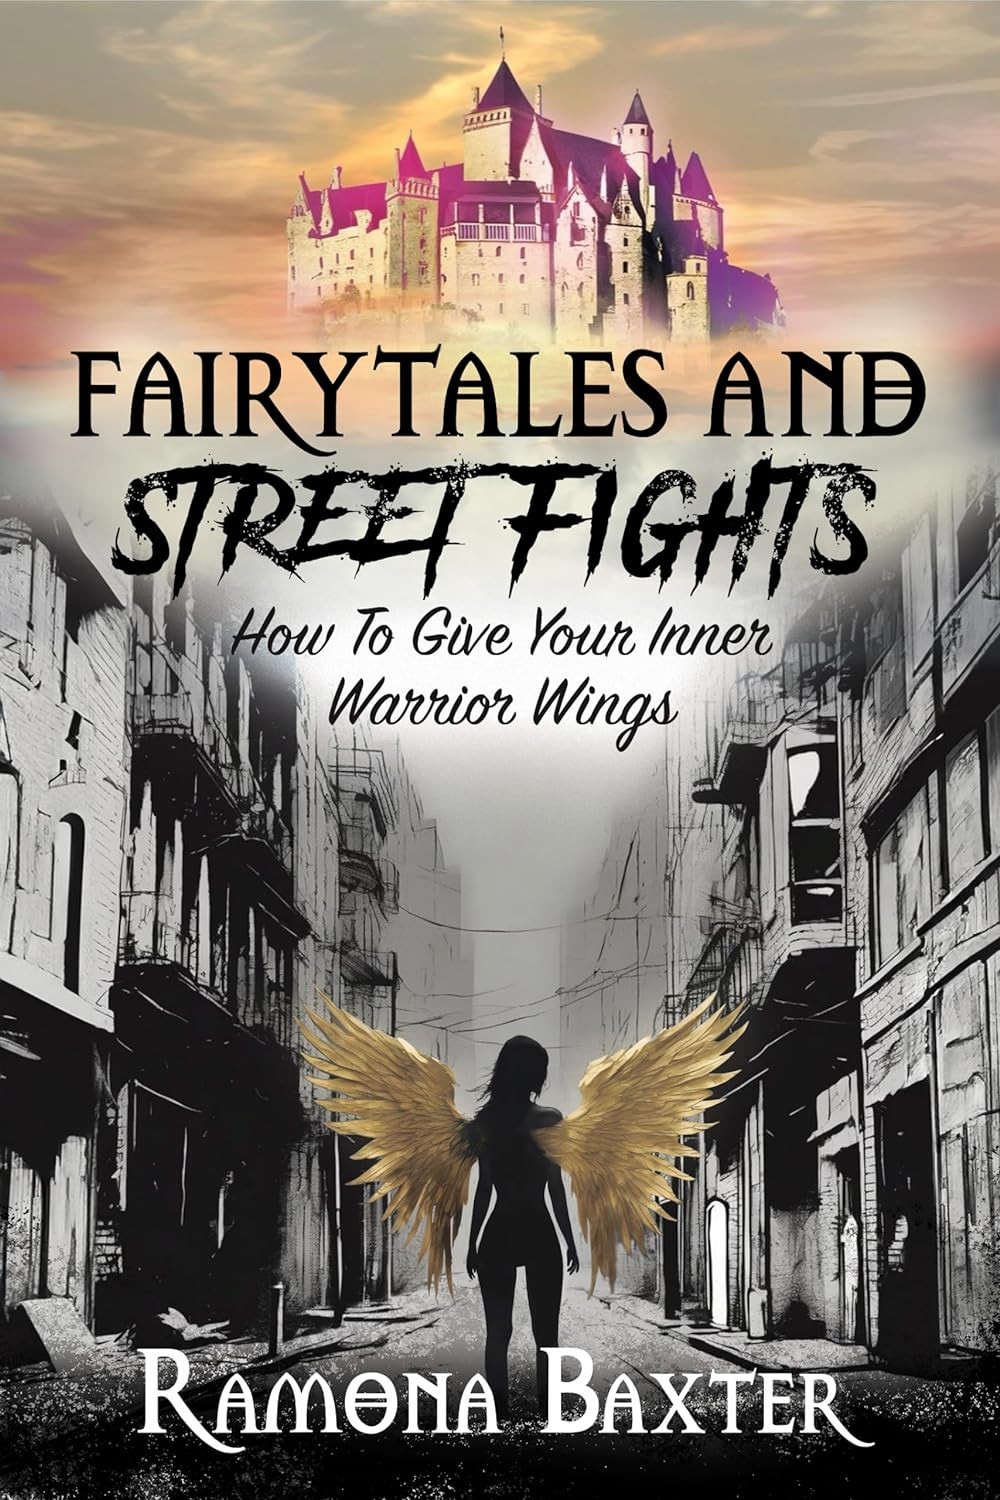 Fairytales and Street Fights